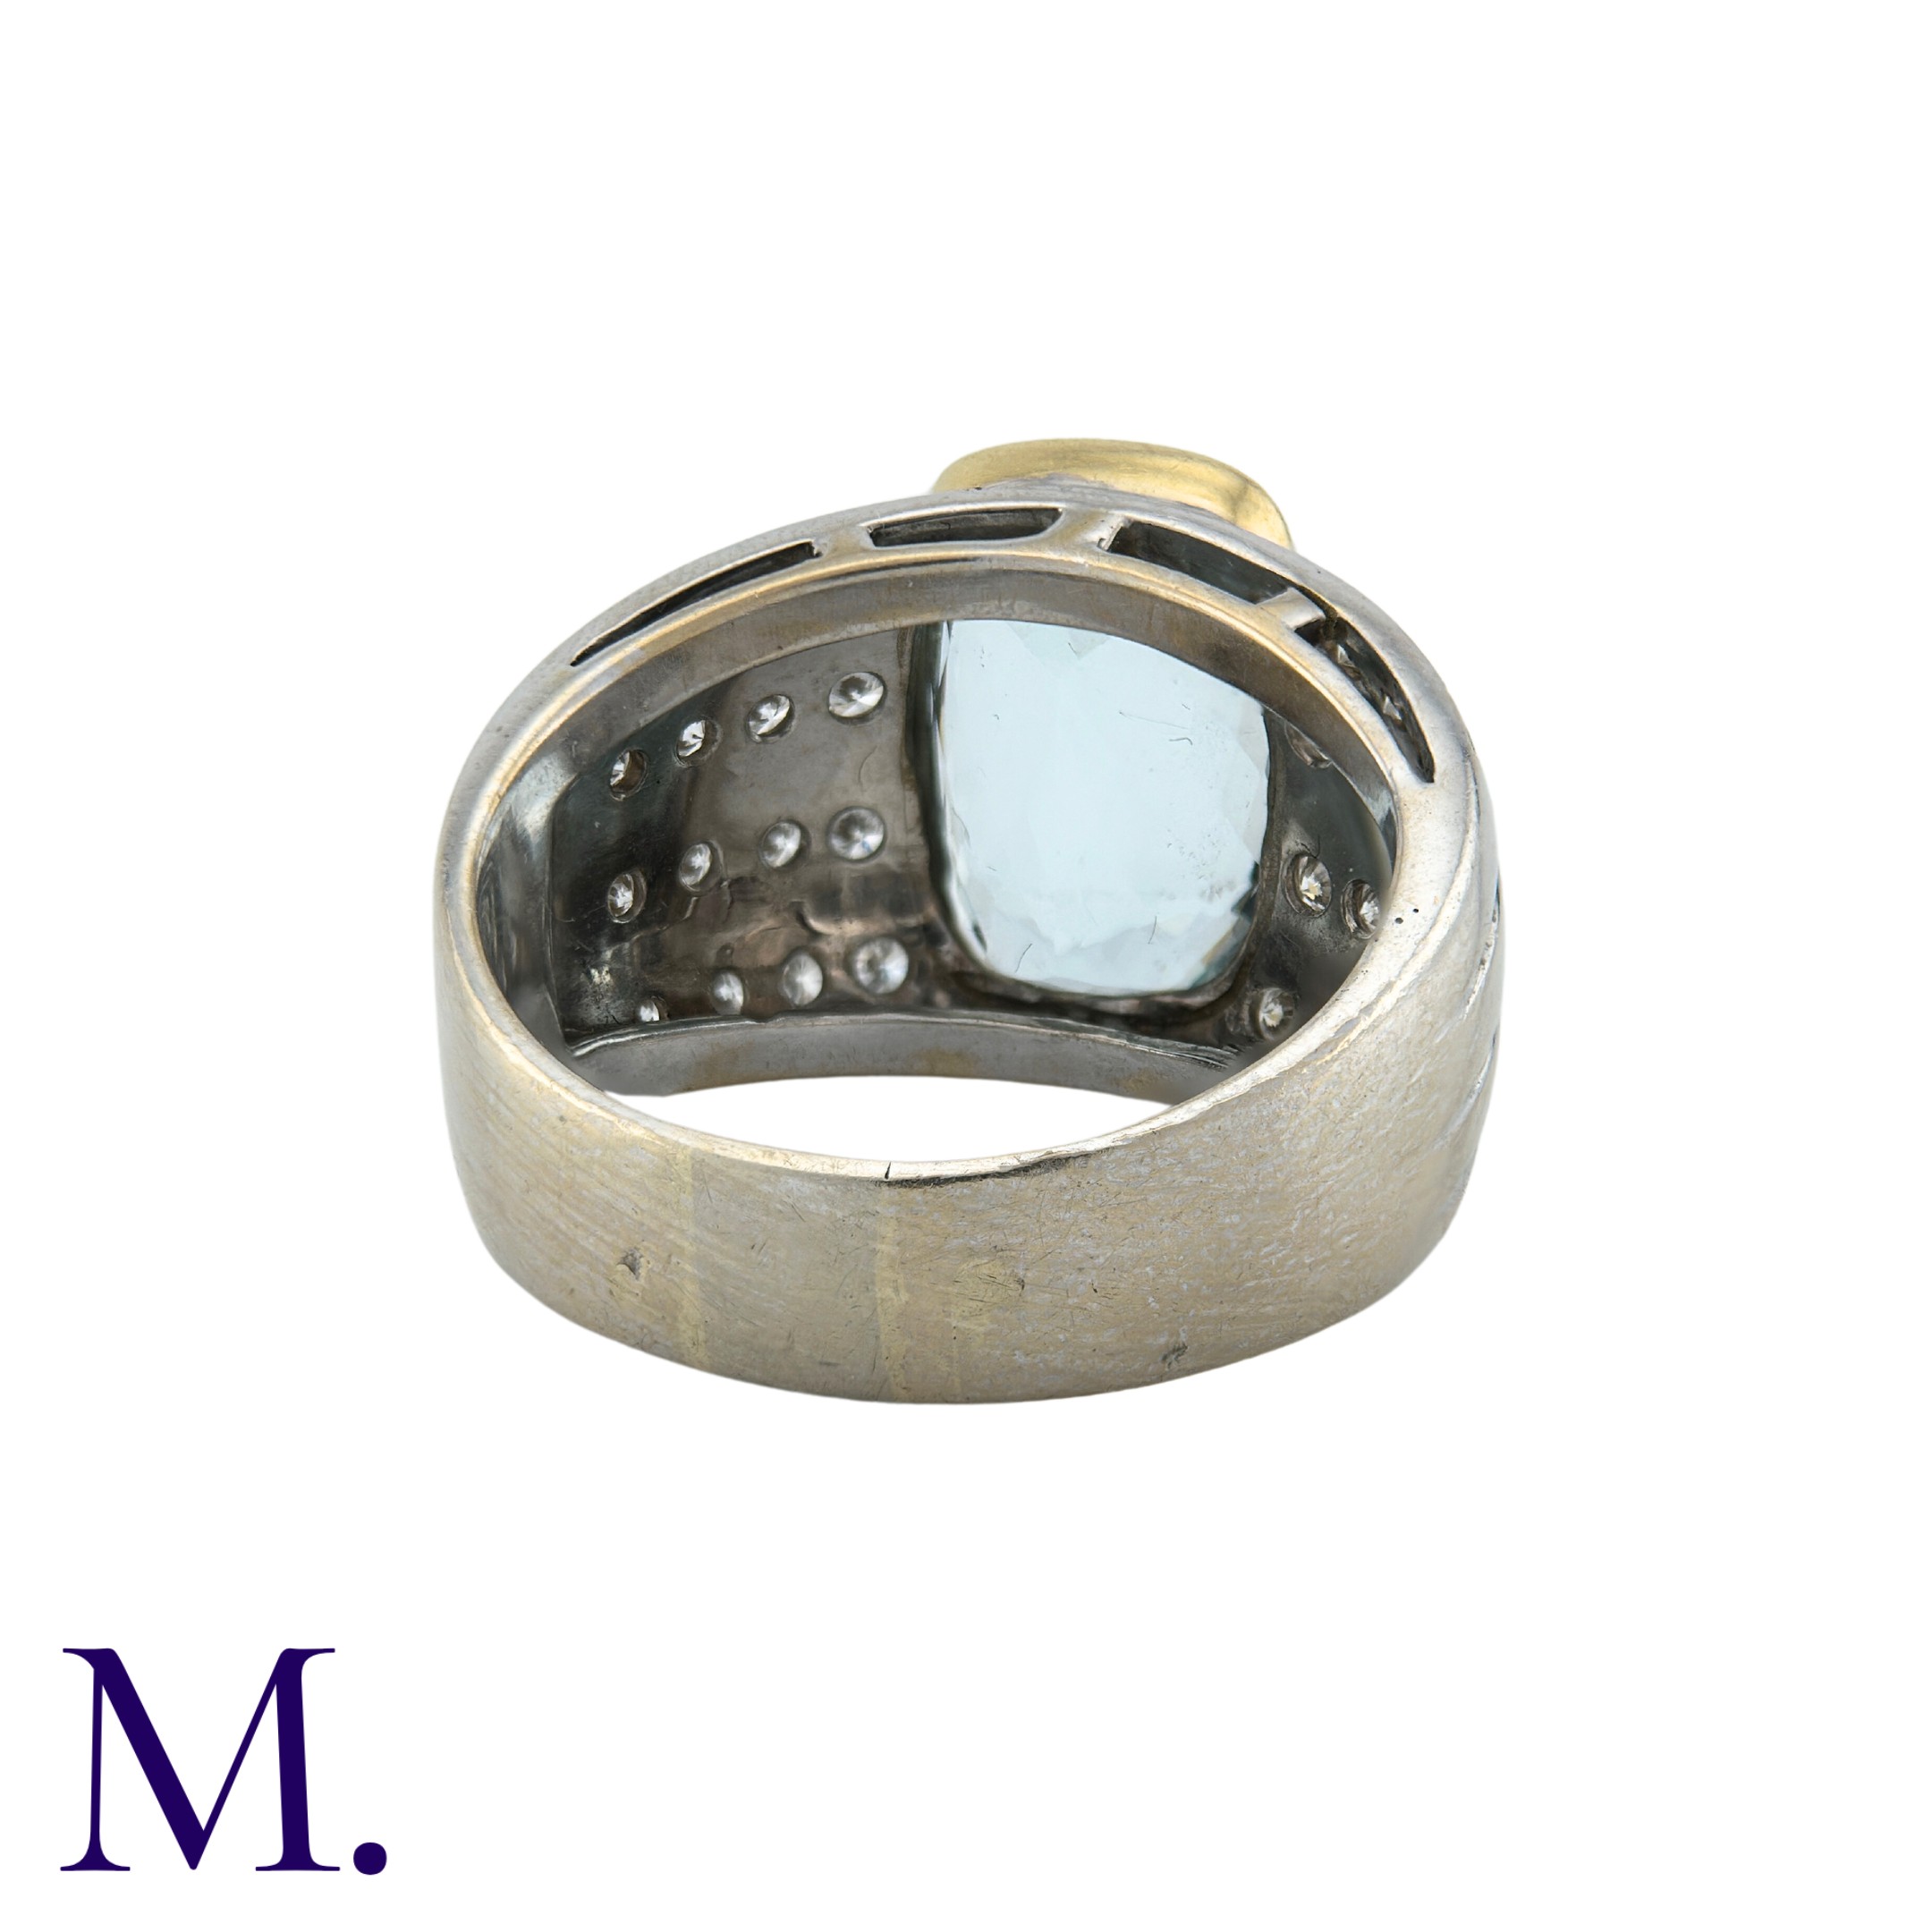 An Aquamarine And Diamond Ring in 18k white and yellow gold, set with a principal aquamarine of - Image 3 of 3